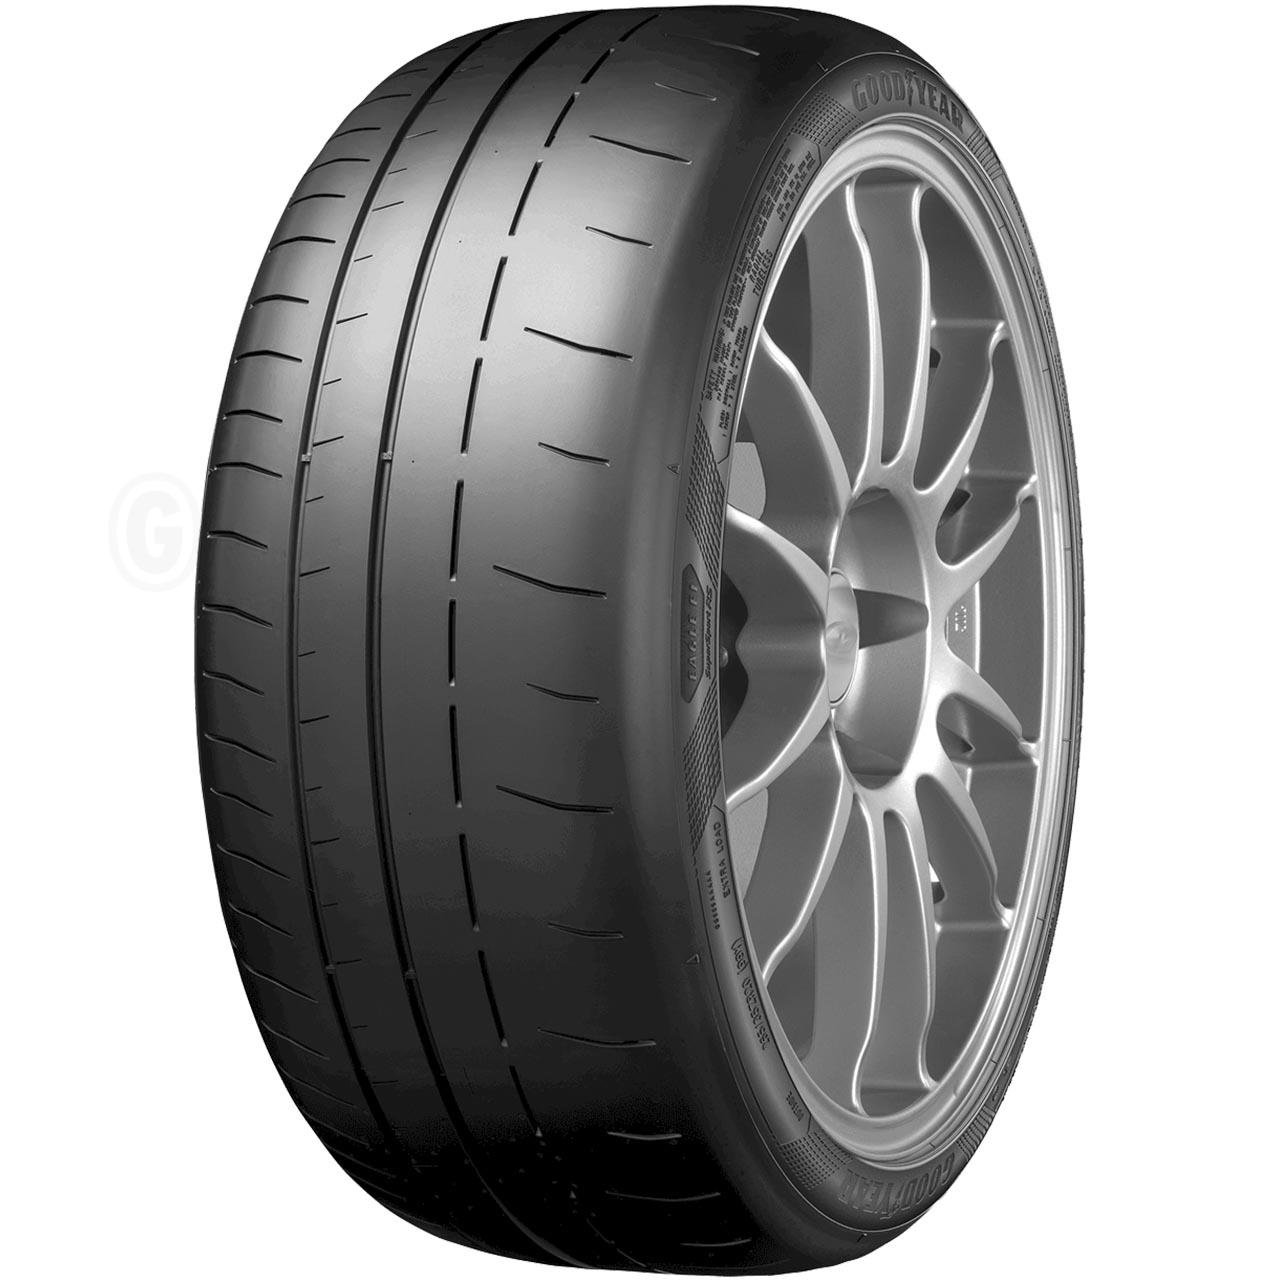 GOODYEAR EAGLE F1 SUPERSPORT RS